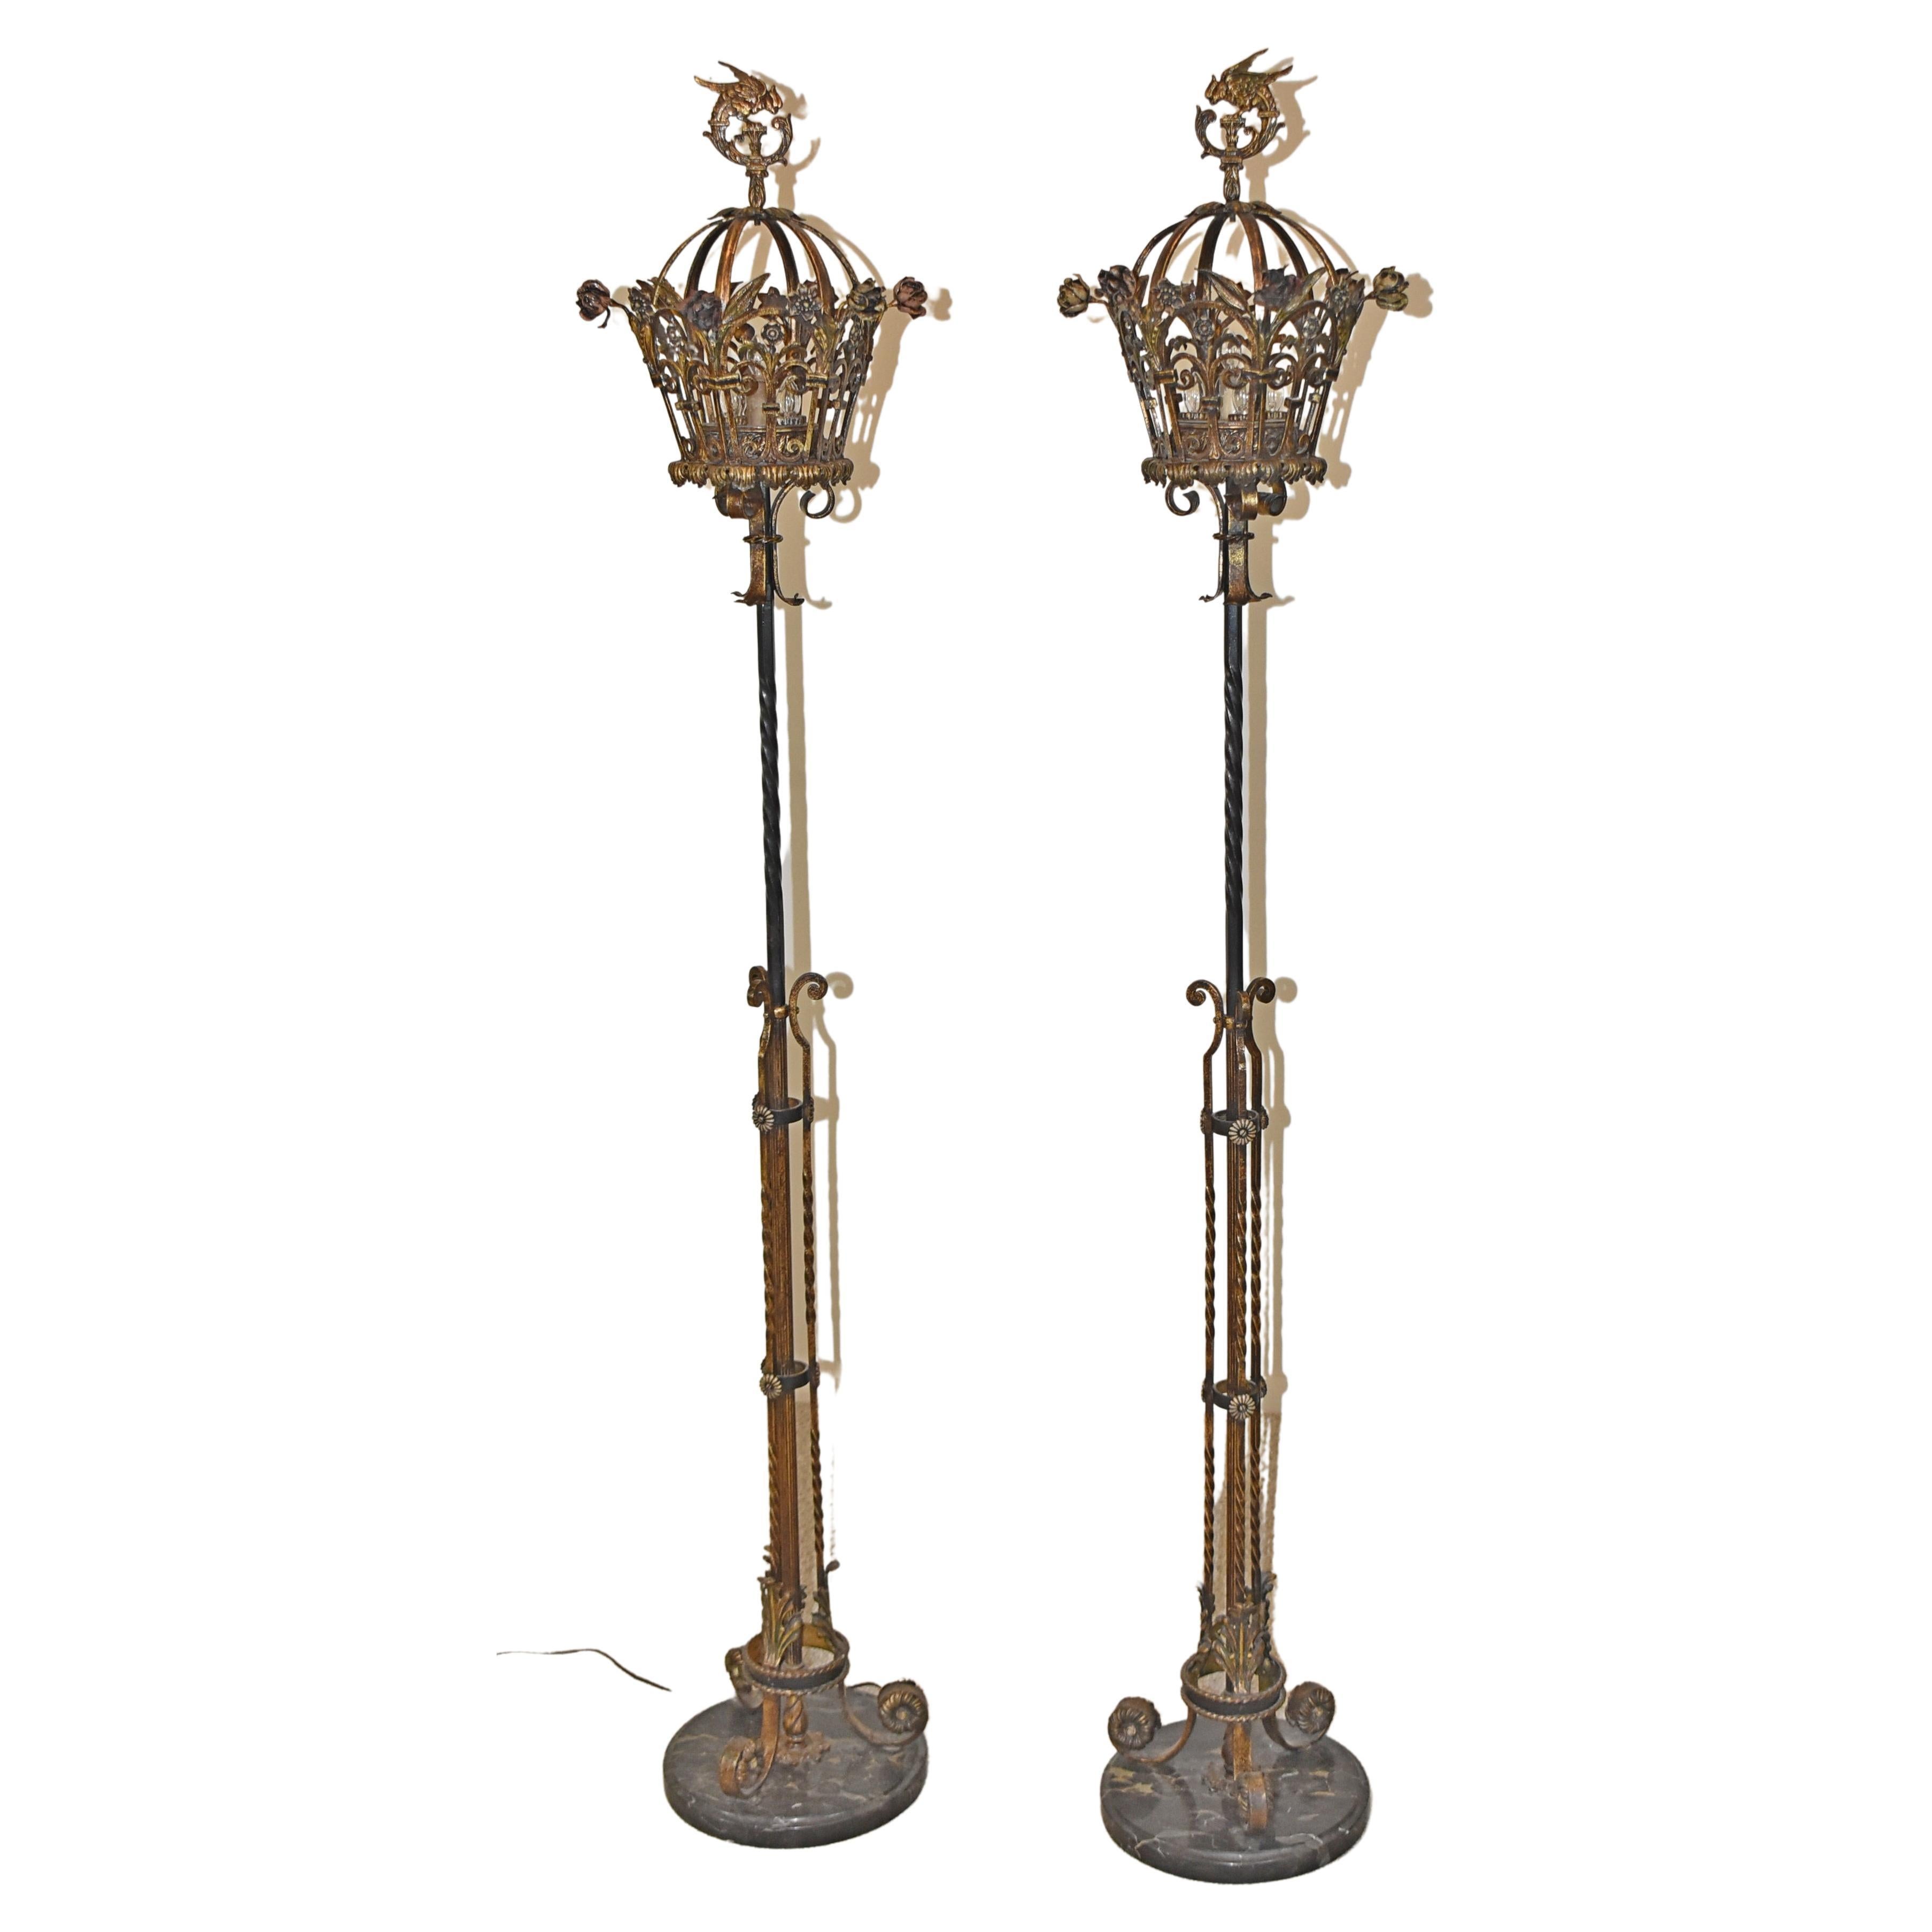 Pair of Wrought Iron 1920s Torchiers Enamel Floral Details